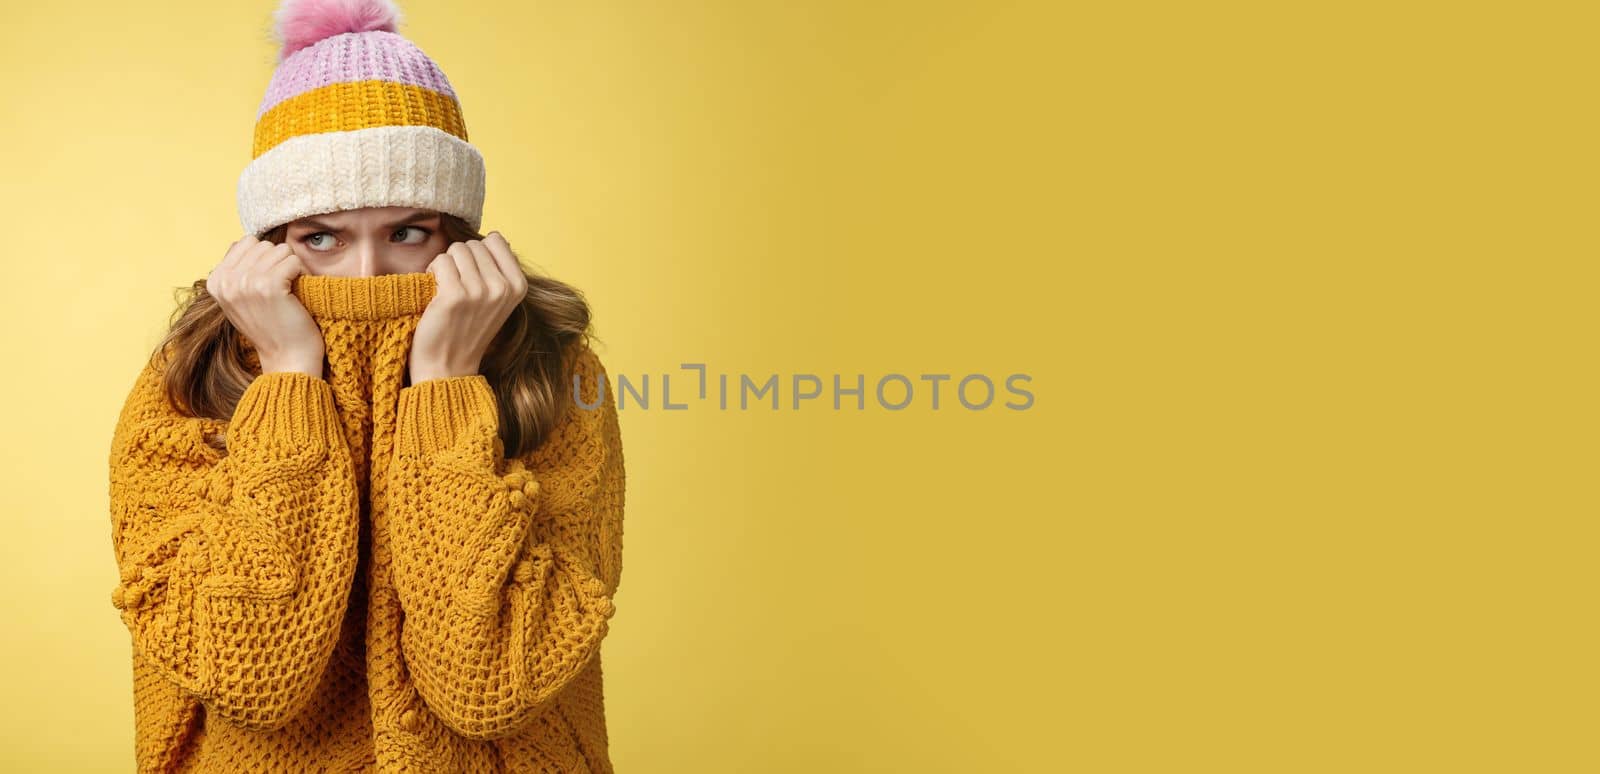 Offended sad whining cute tender young girl hiding face pull sweater nose peek look aside insulted complaining being insulted, standing miserable upset wearing warm winter corduroy hat.